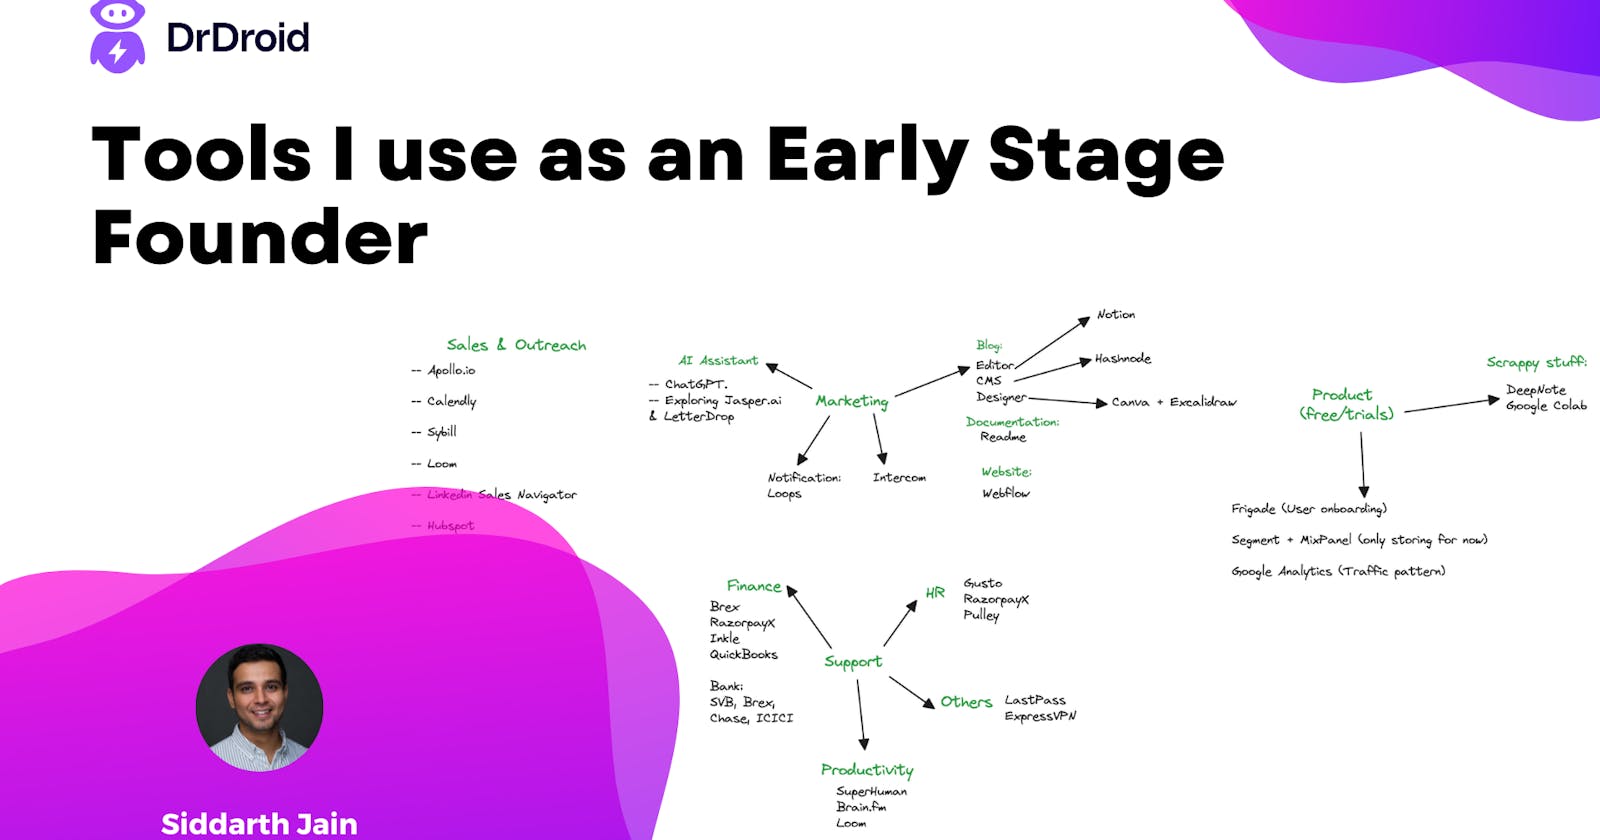 Tools I use as an early stage founder